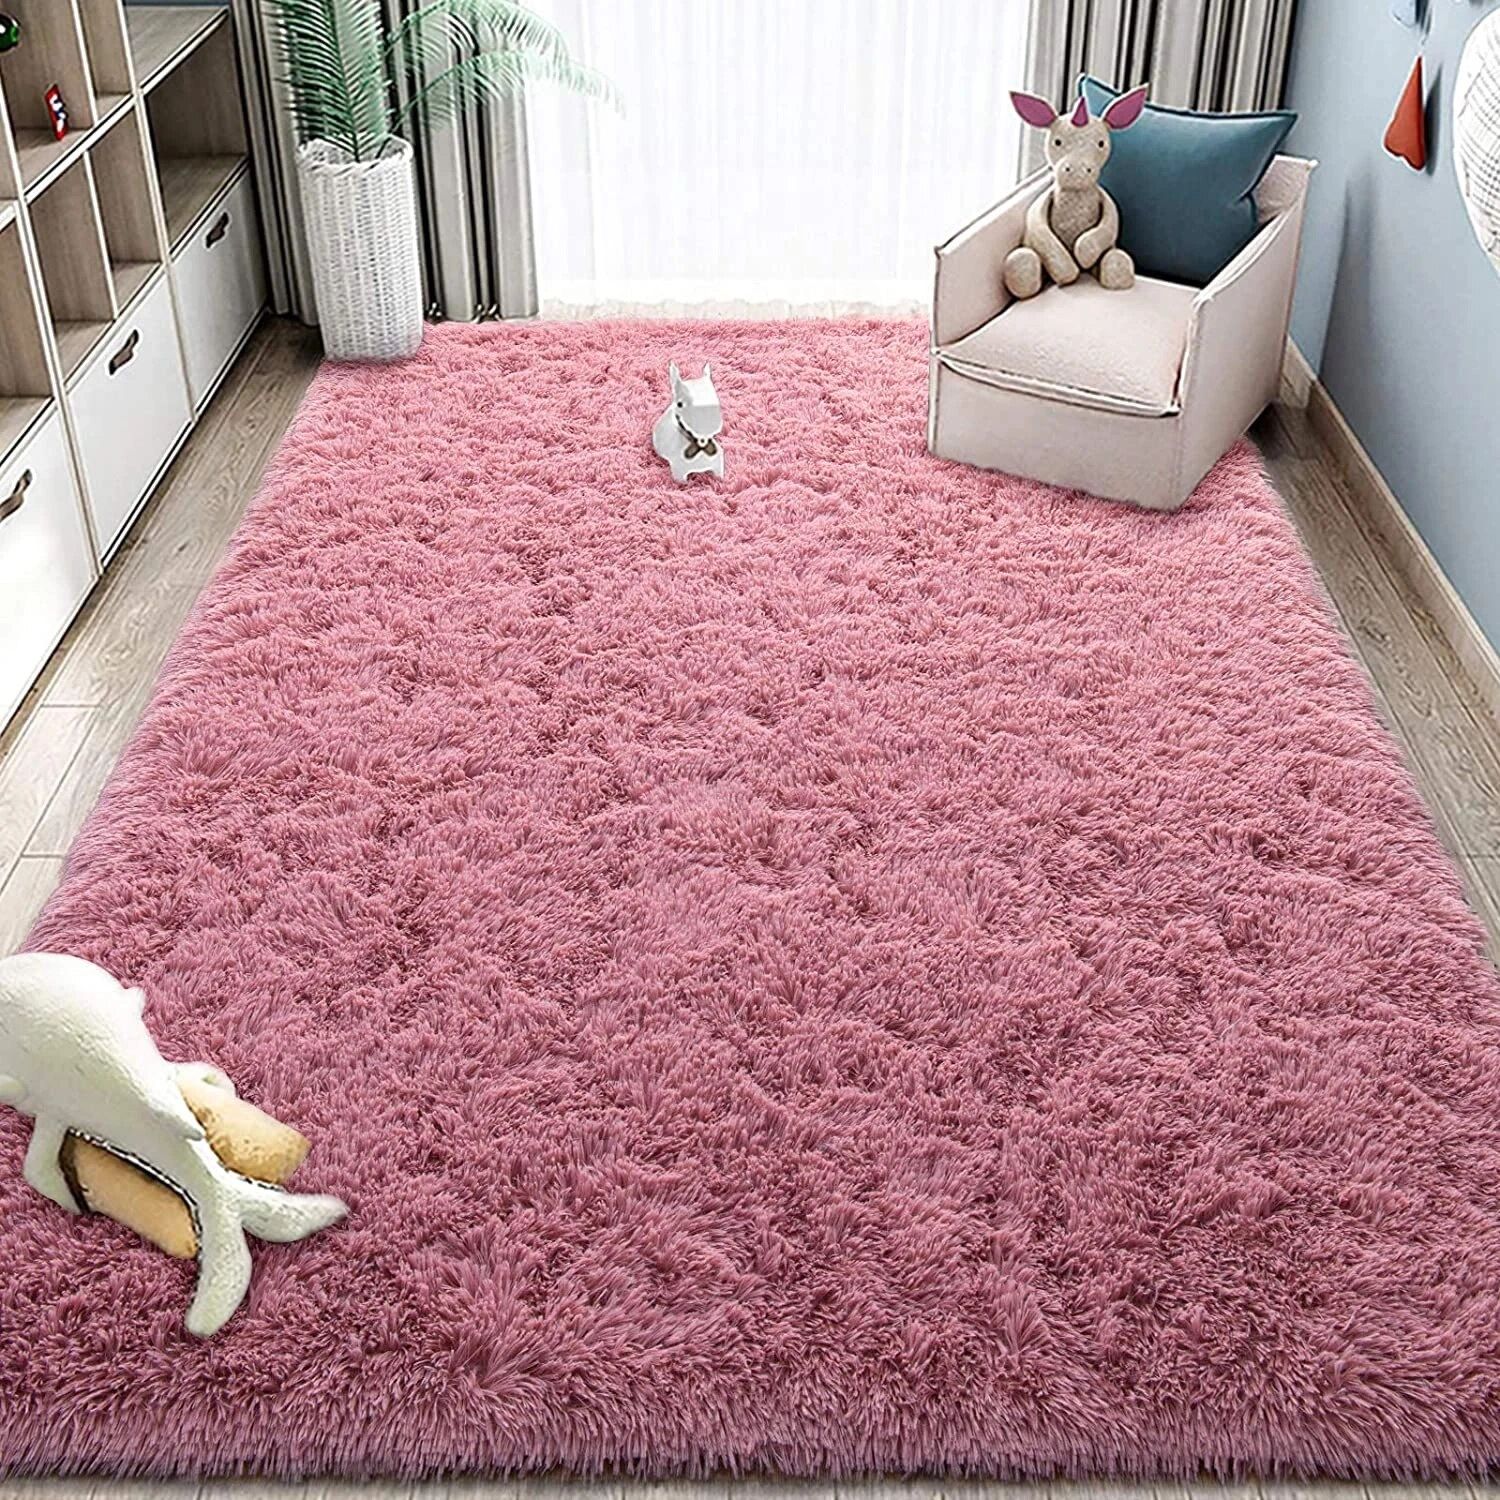 Ultra Soft Plush Shaggy Carpet Living Room Rug Fluffy Area Rug For Kids  Room Nursery Home Decor Fuzzy Rug With Anti Slip Bottom – Carpet –  Aliexpress Within Pink Soft Touch Shag Rugs (View 2 of 15)